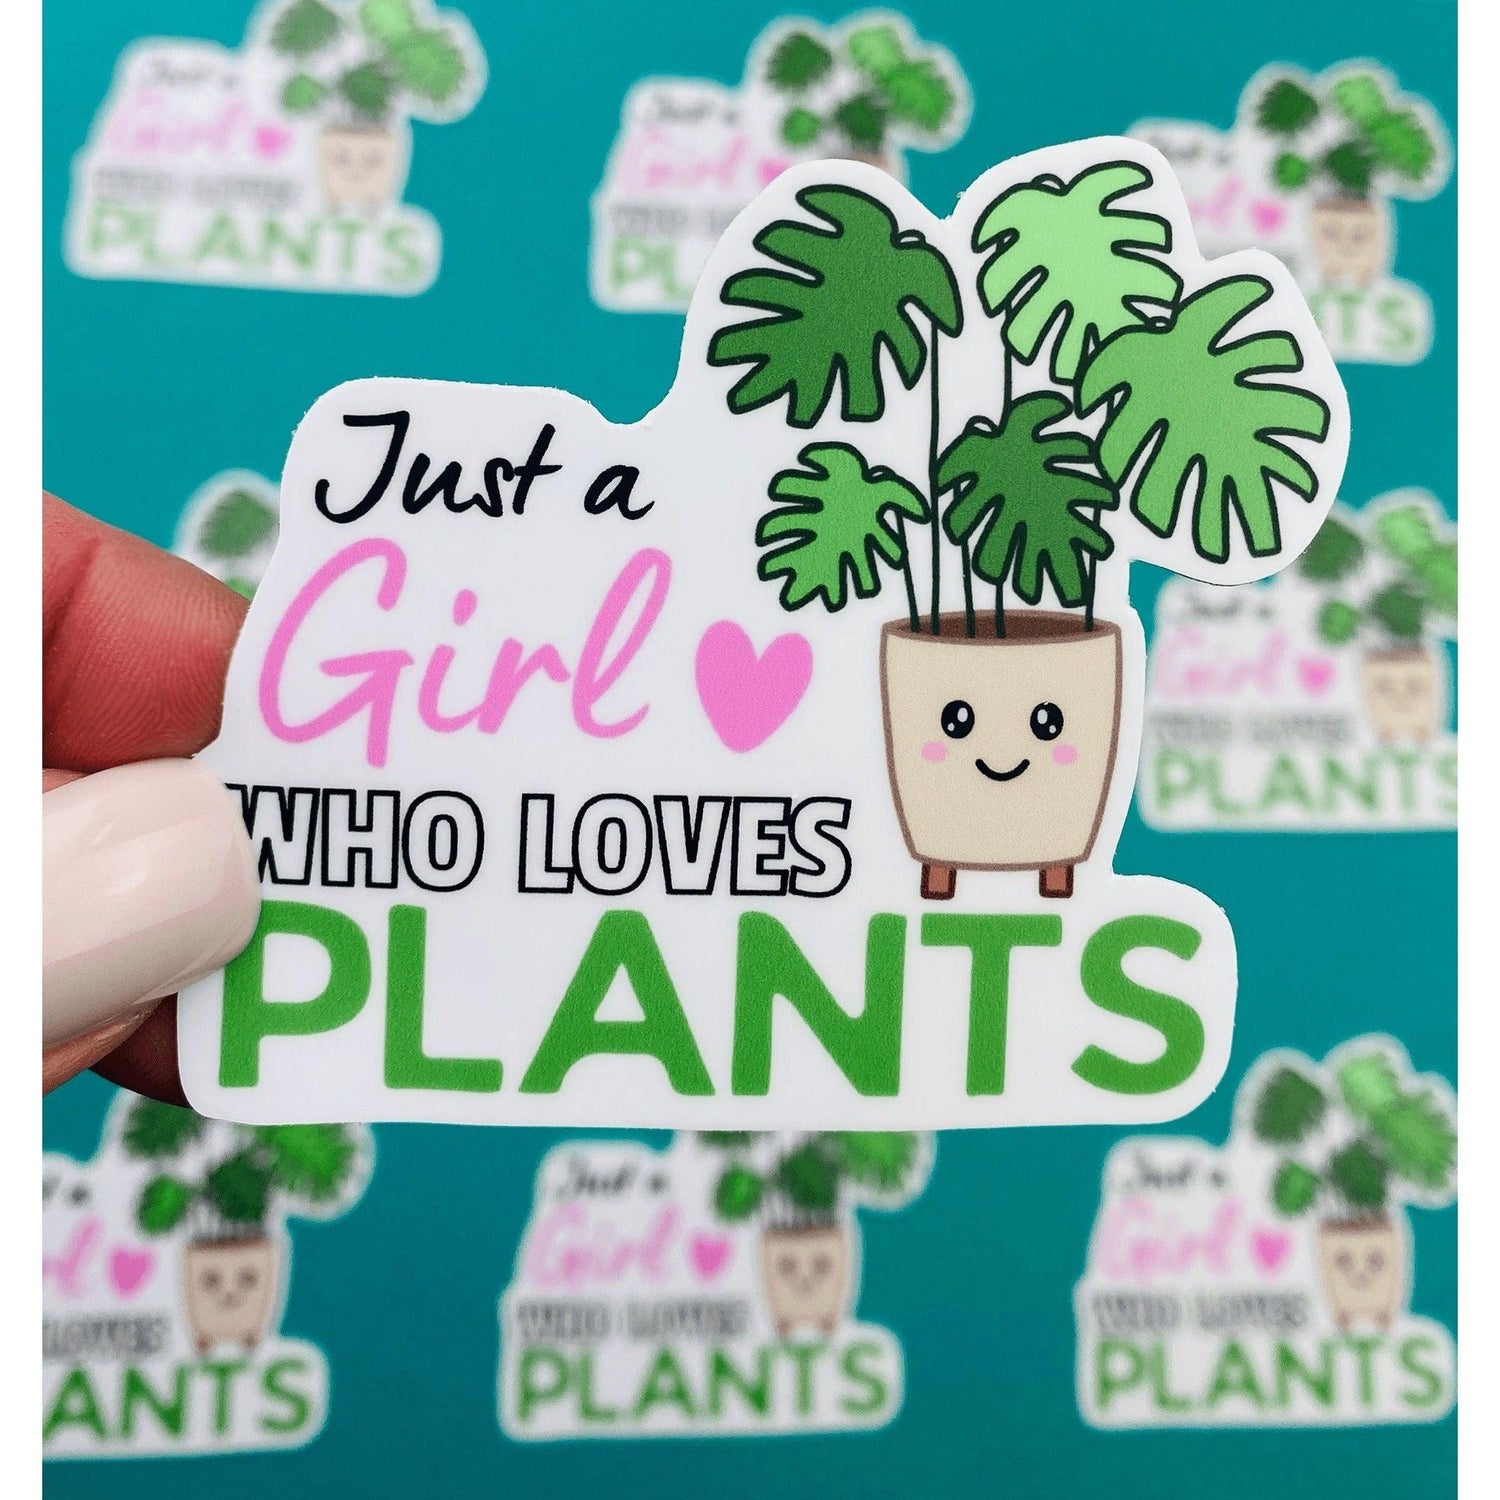 Kawaii Plant Love Sticker, Girl Who Loves Plants Sticker,Kawaii   Monstera Plant Sticker for Plant Lovers, Cute Stickers for Water Bottle - Ottos Grotto :: Stickers For Your Stuff